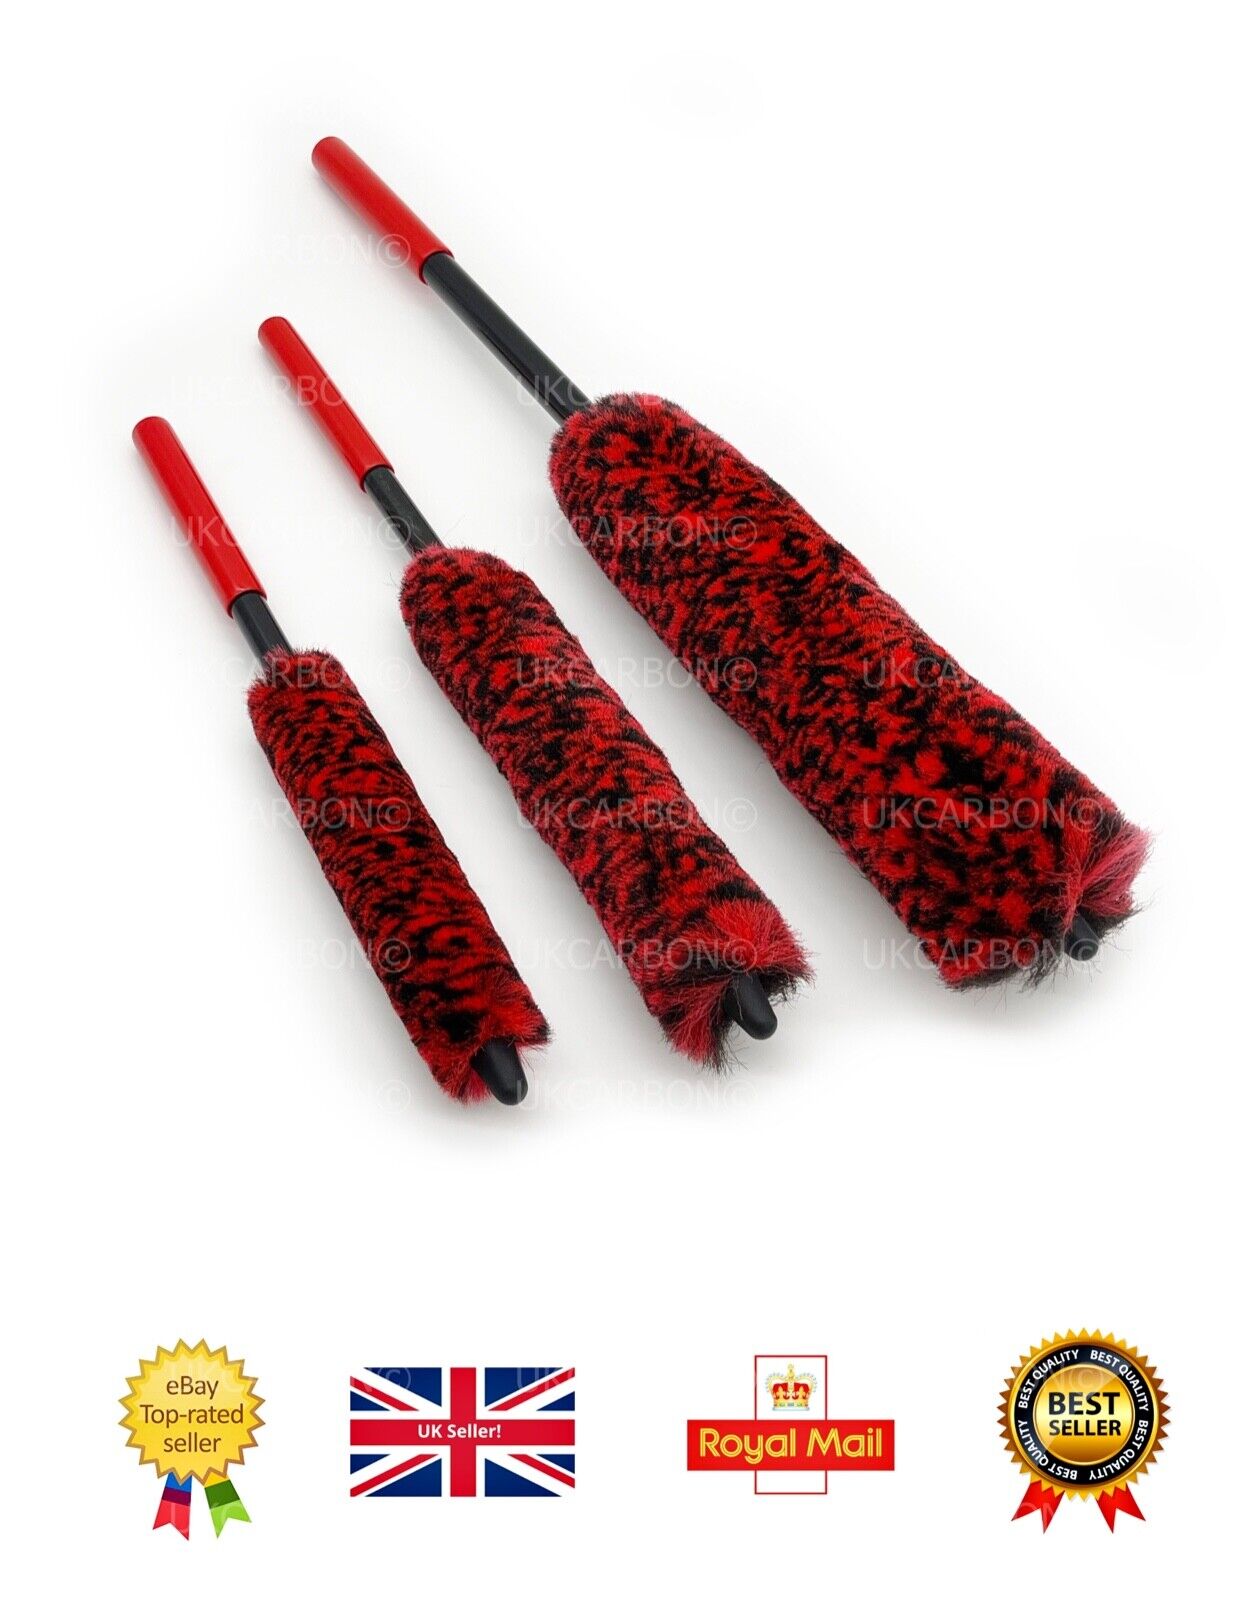 Alloy Wheel Cleaning Soft Brush Microfibre Wool Wand None Scratch Tool Large 3pc